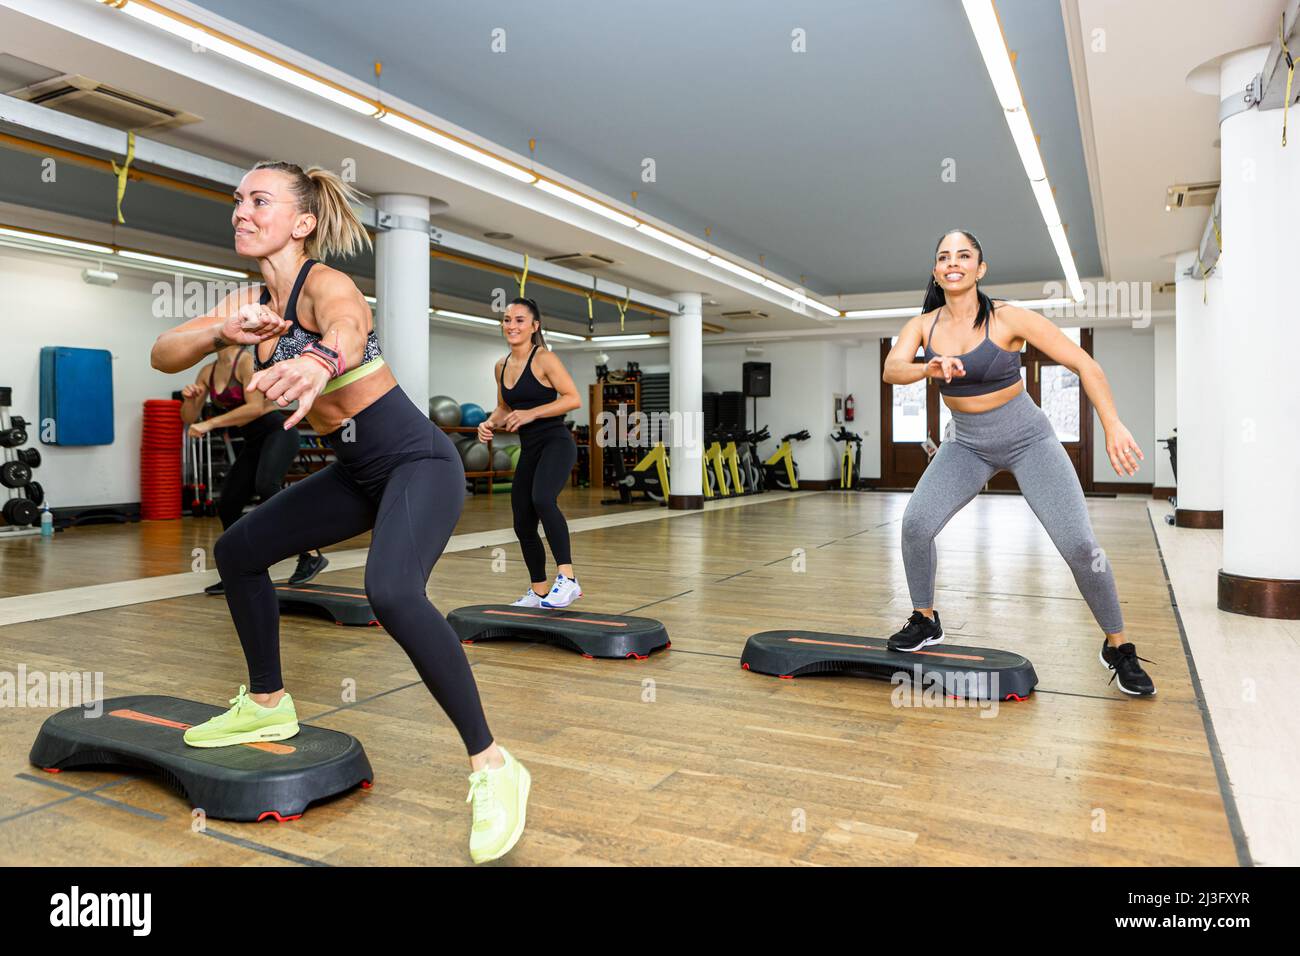 Group of fit female athletes in activewear smiling and lunging on steppers during aerobic workout in spacious gym Stock Photo